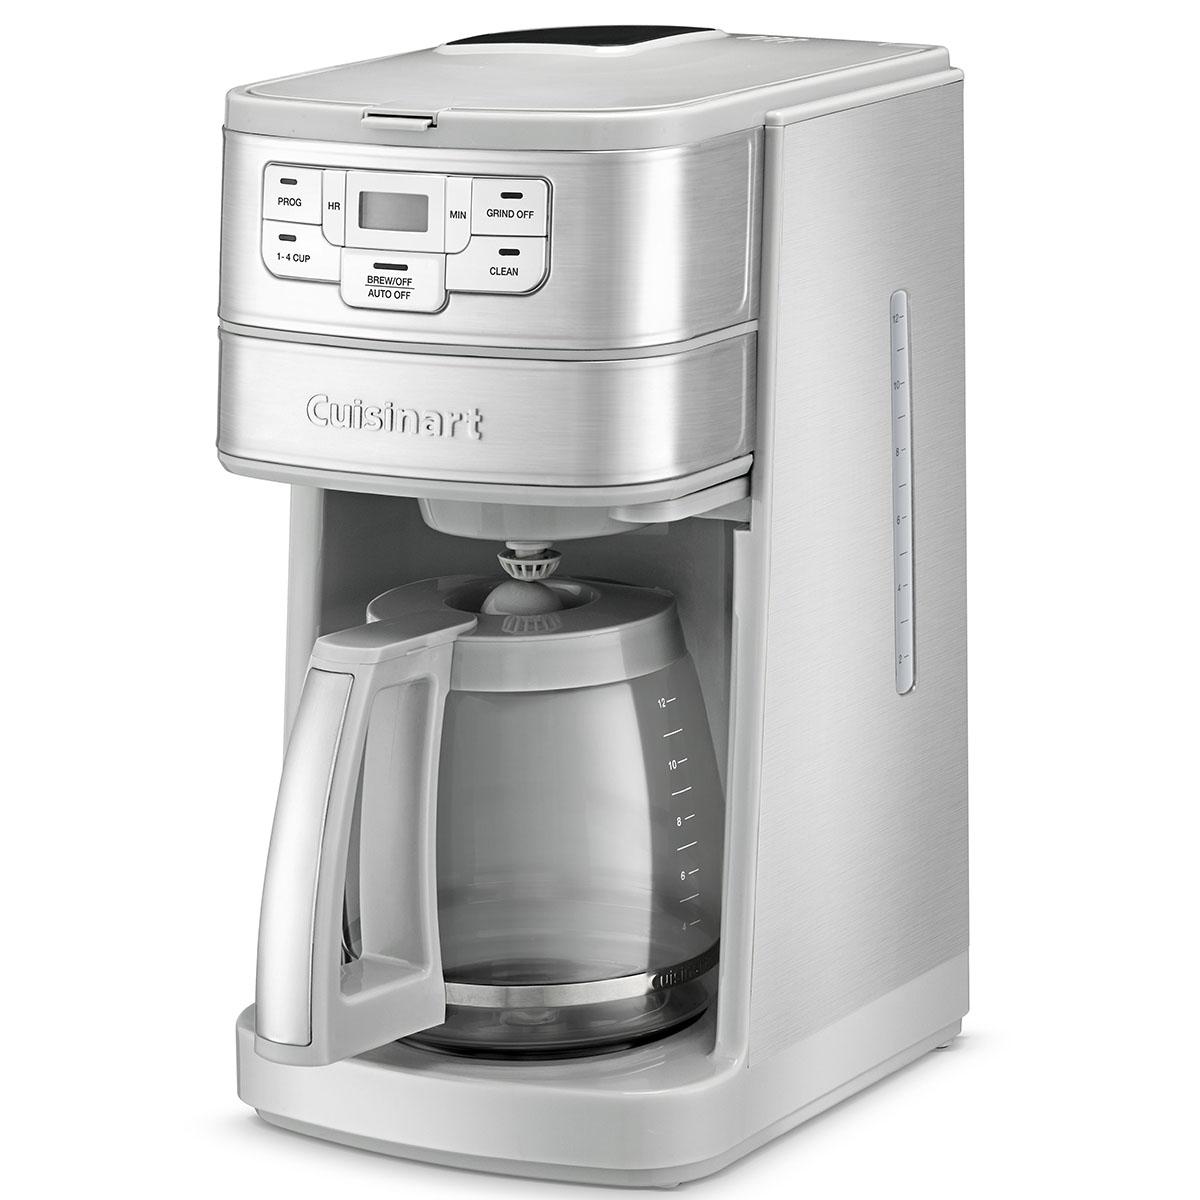 Cuisinart Automatic Grind and Brew 12-Cup Coffeemaker for $44.95 Shipped